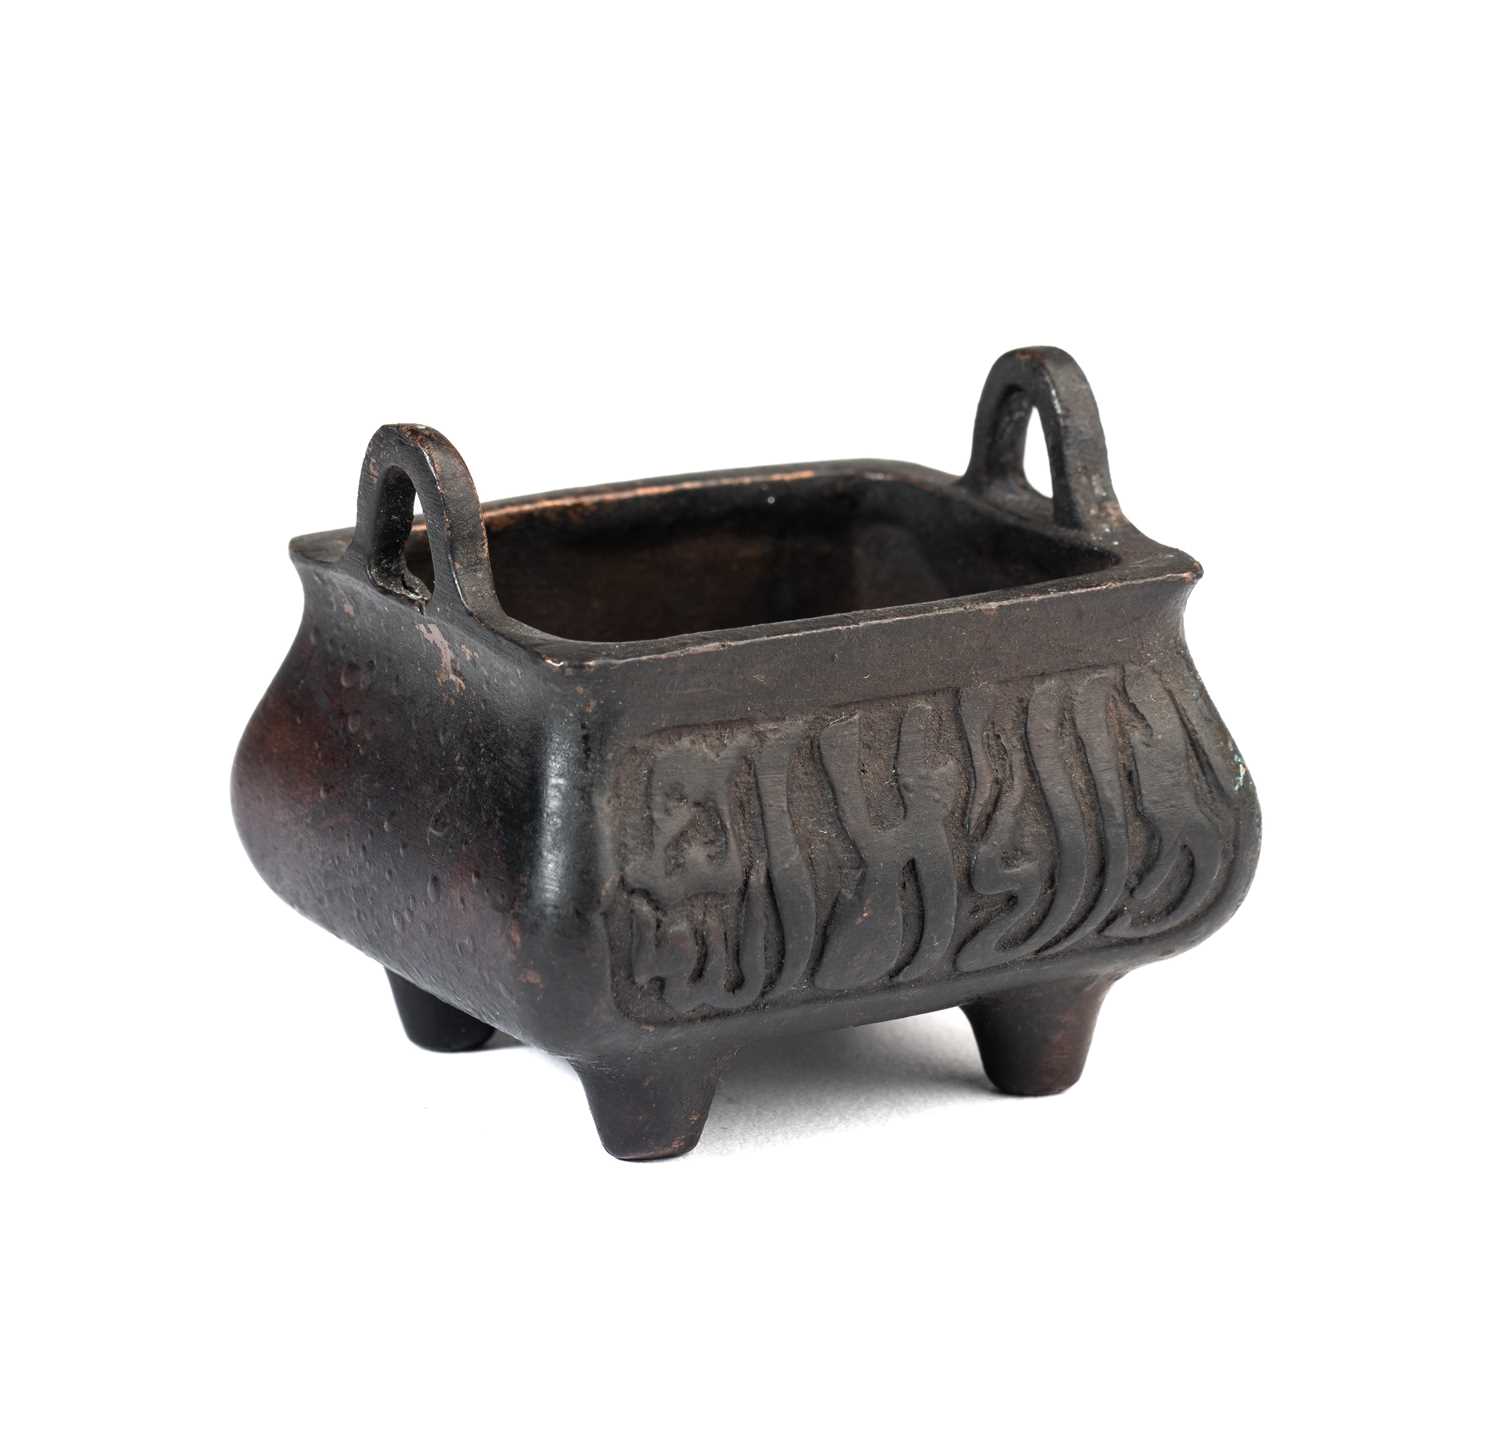 Lot 33 - A SMALL CHINESE BRONZE CENSER FOR THE ISLAMIC MARKET, QING DYNASTY, 18TH/19TH CENTURY